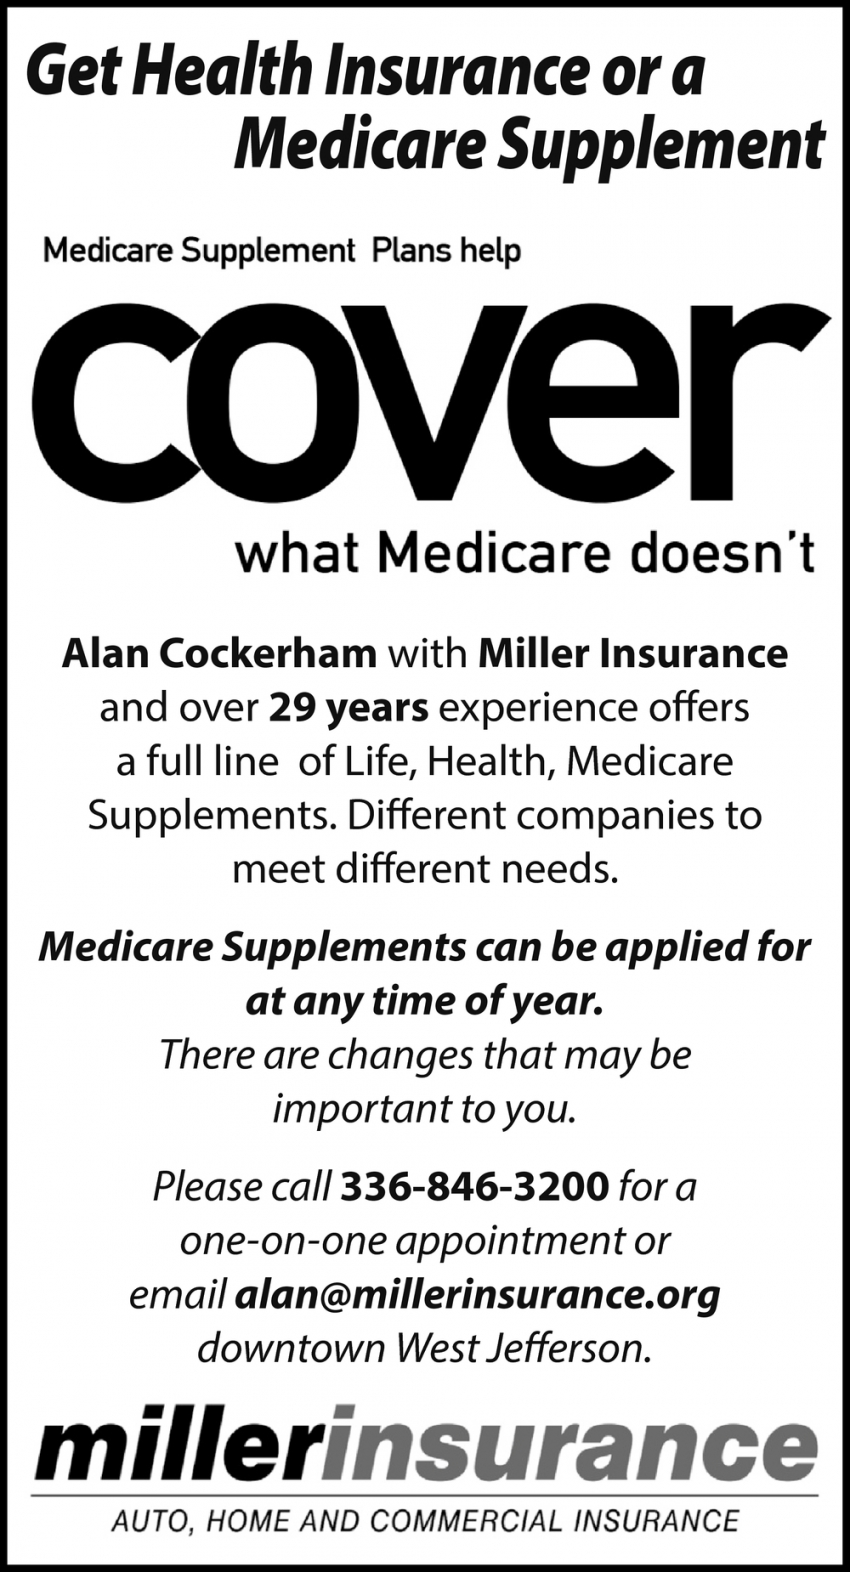 Get Health Insurance or a Medicare Supplement